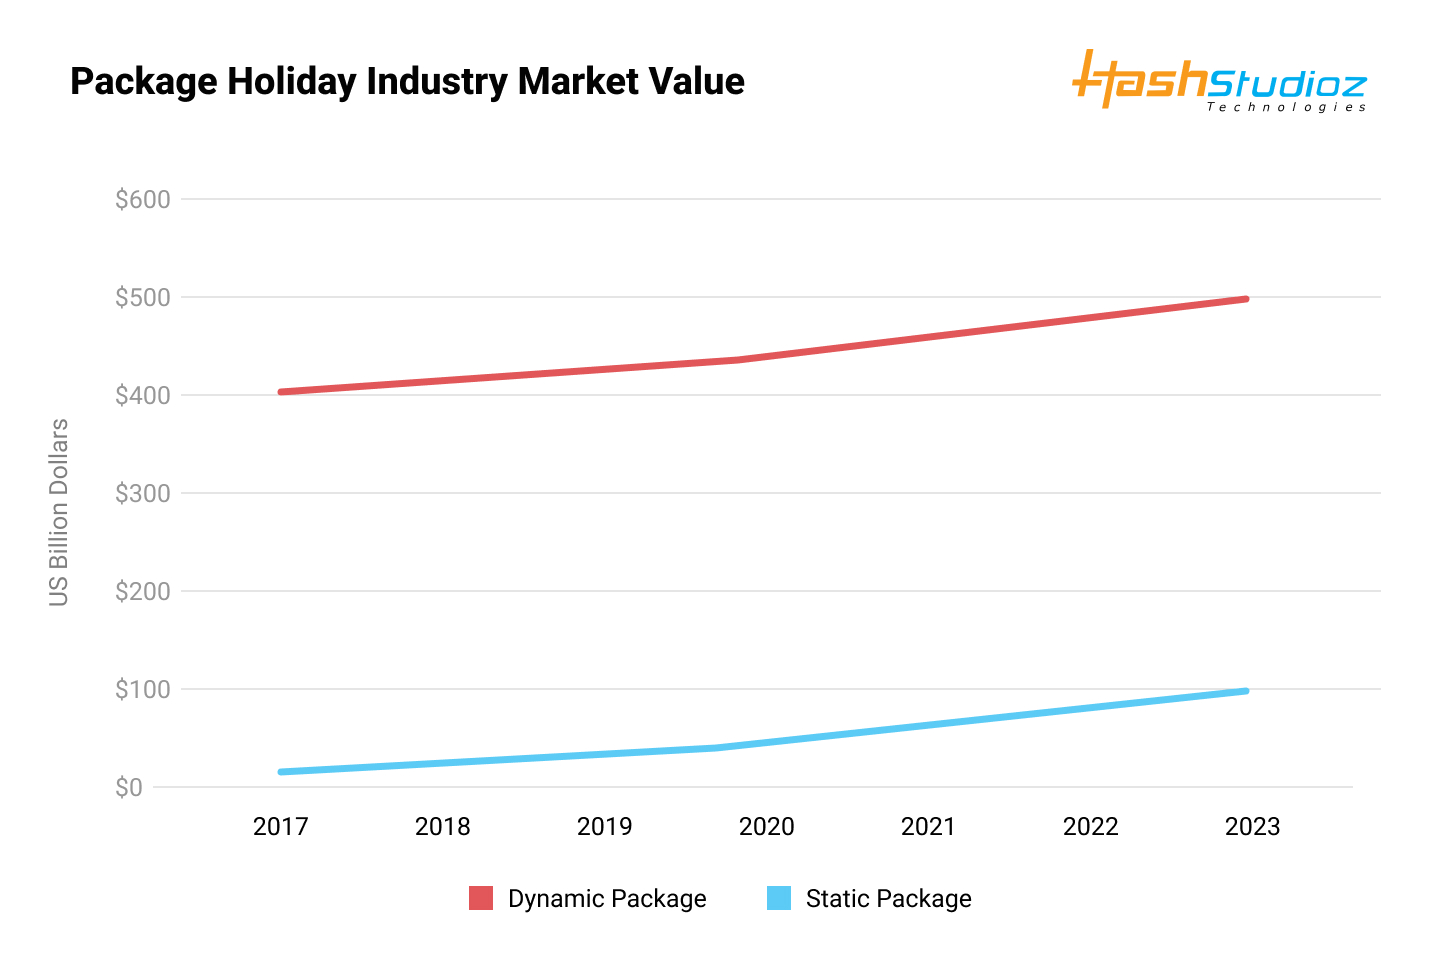 Dynamic Packaging Holiday Industry Market Value